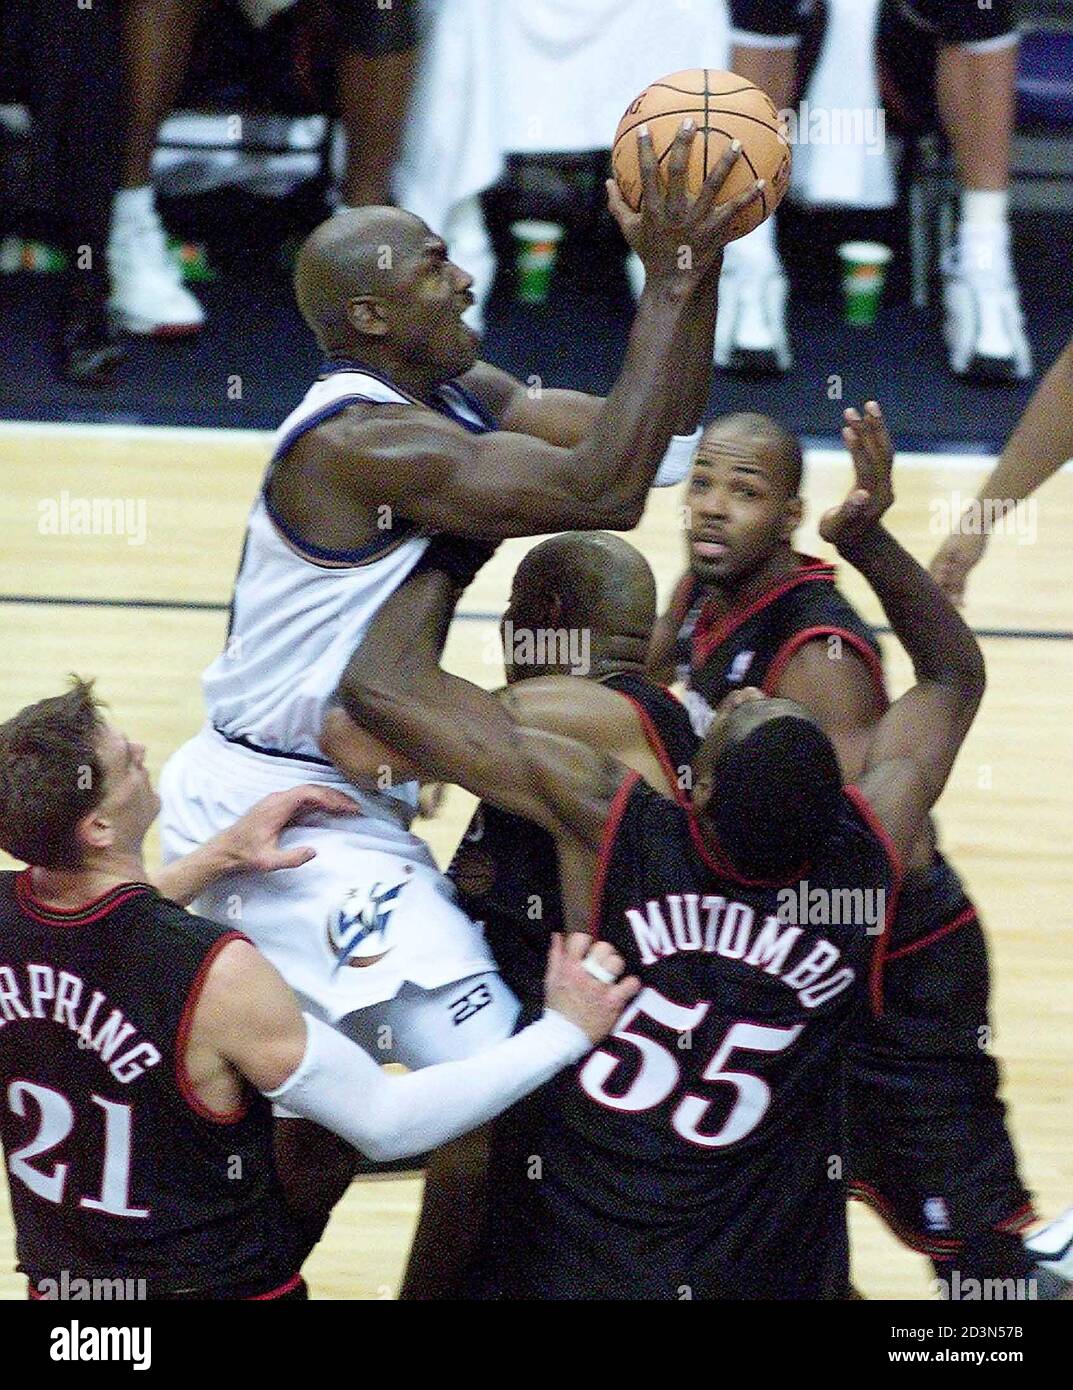 Wizards' Michael Jordan a crowd of Philadelphia 76ers as he goes up for a shot in the fourth at the MCI Center in Washington November 3, 2001. players,